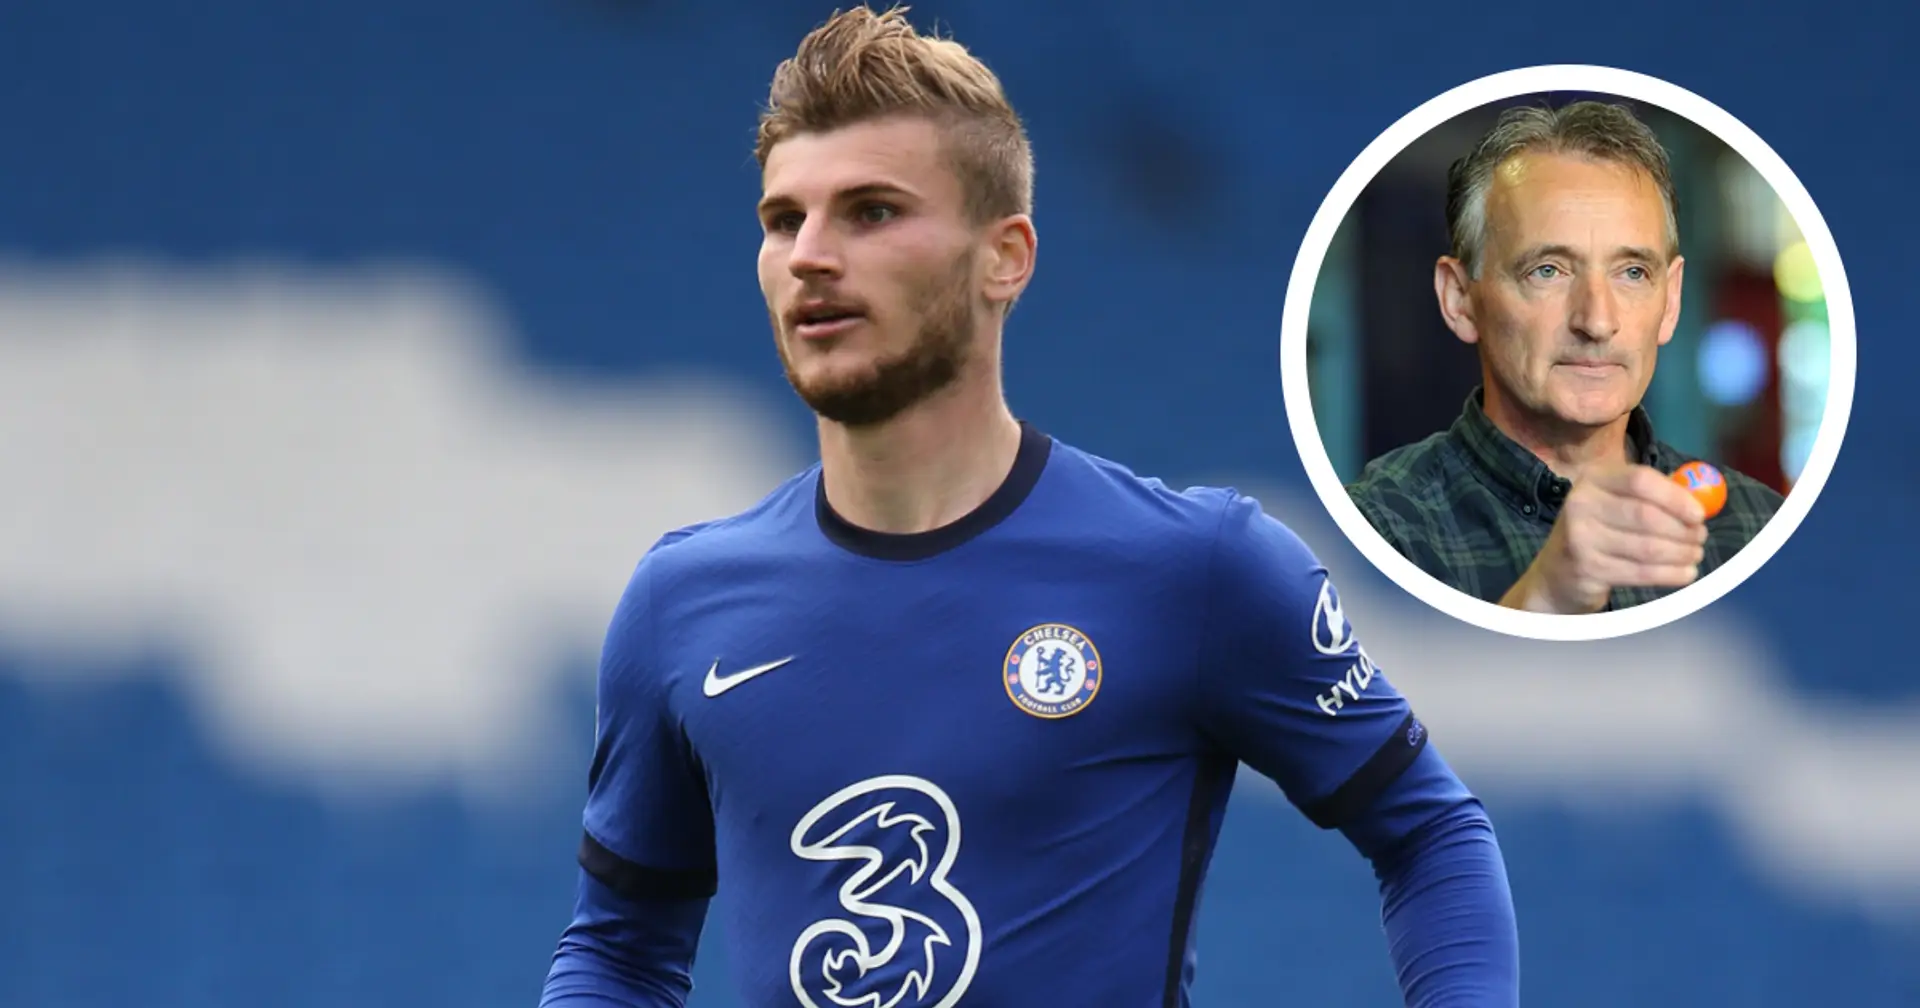 Pat Nevin: Timo Werner could start the season on fire